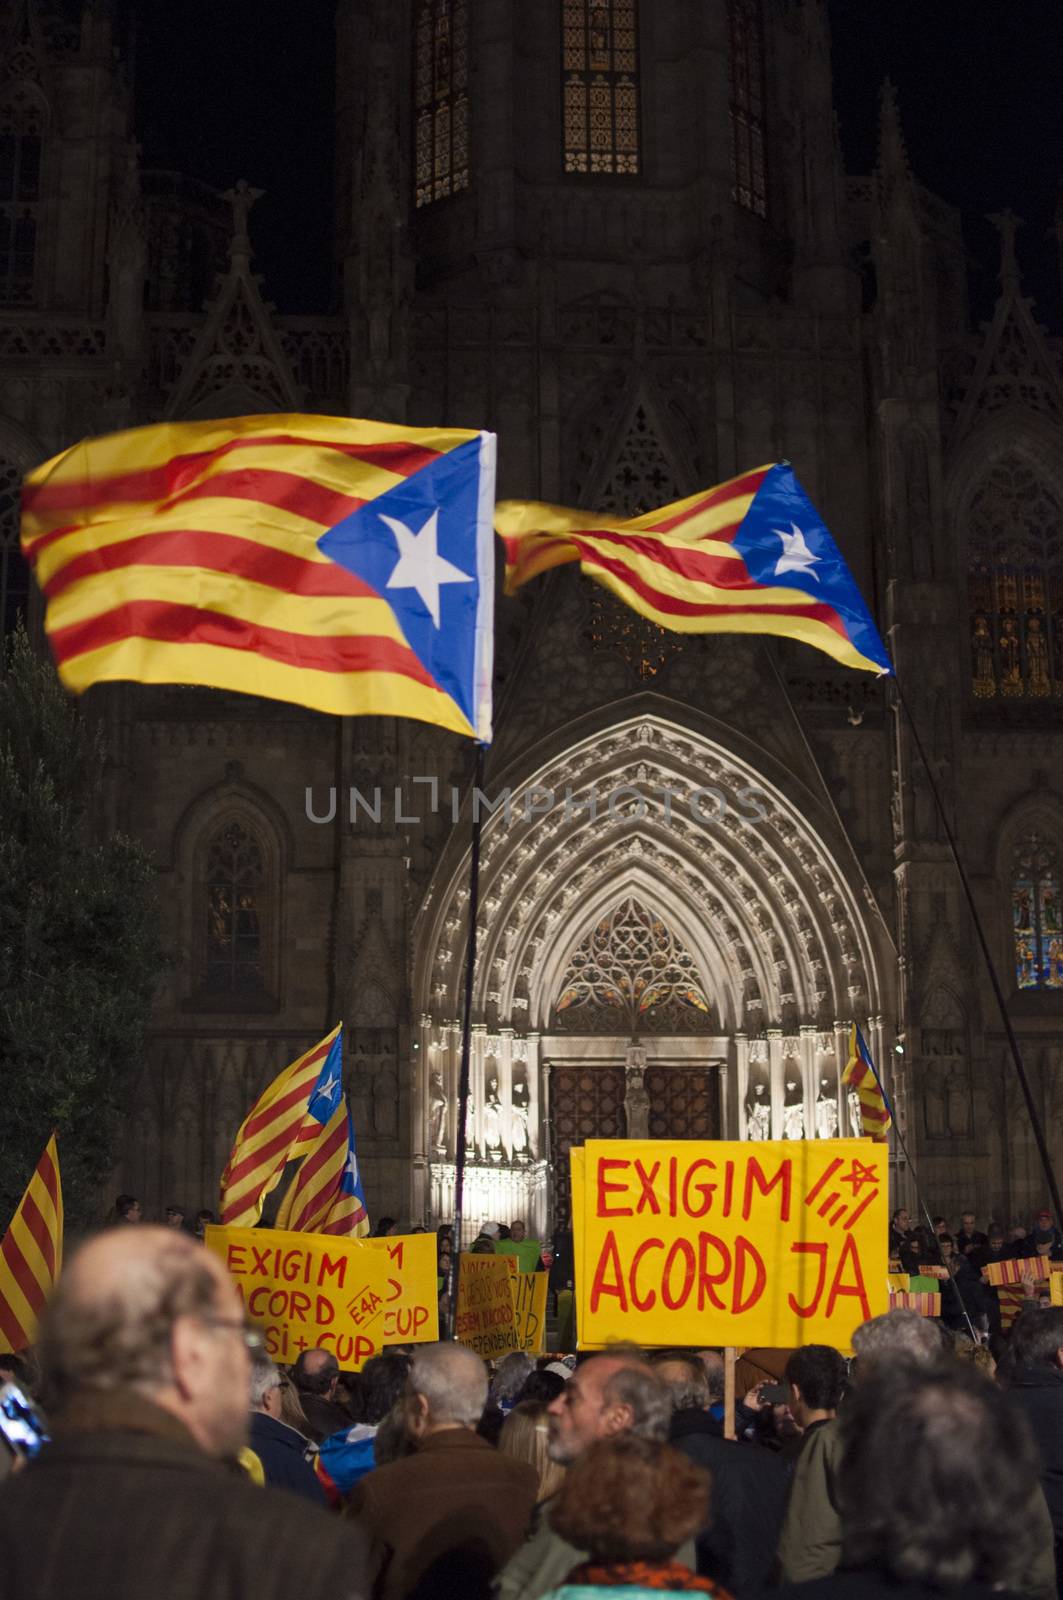 SPAIN, Barcelona: An estimated one thousand people rally for Catalan independence in the plaza of the Cathedral of Barcelona in Spain on January 7, 2016. Protesters push for an agreement between the pro-independence Together For Yes (Junts pel Si) and Popular Unity Candidacy (CUP) parties for the formation of a new government; and the prevention of elections to be held on March.